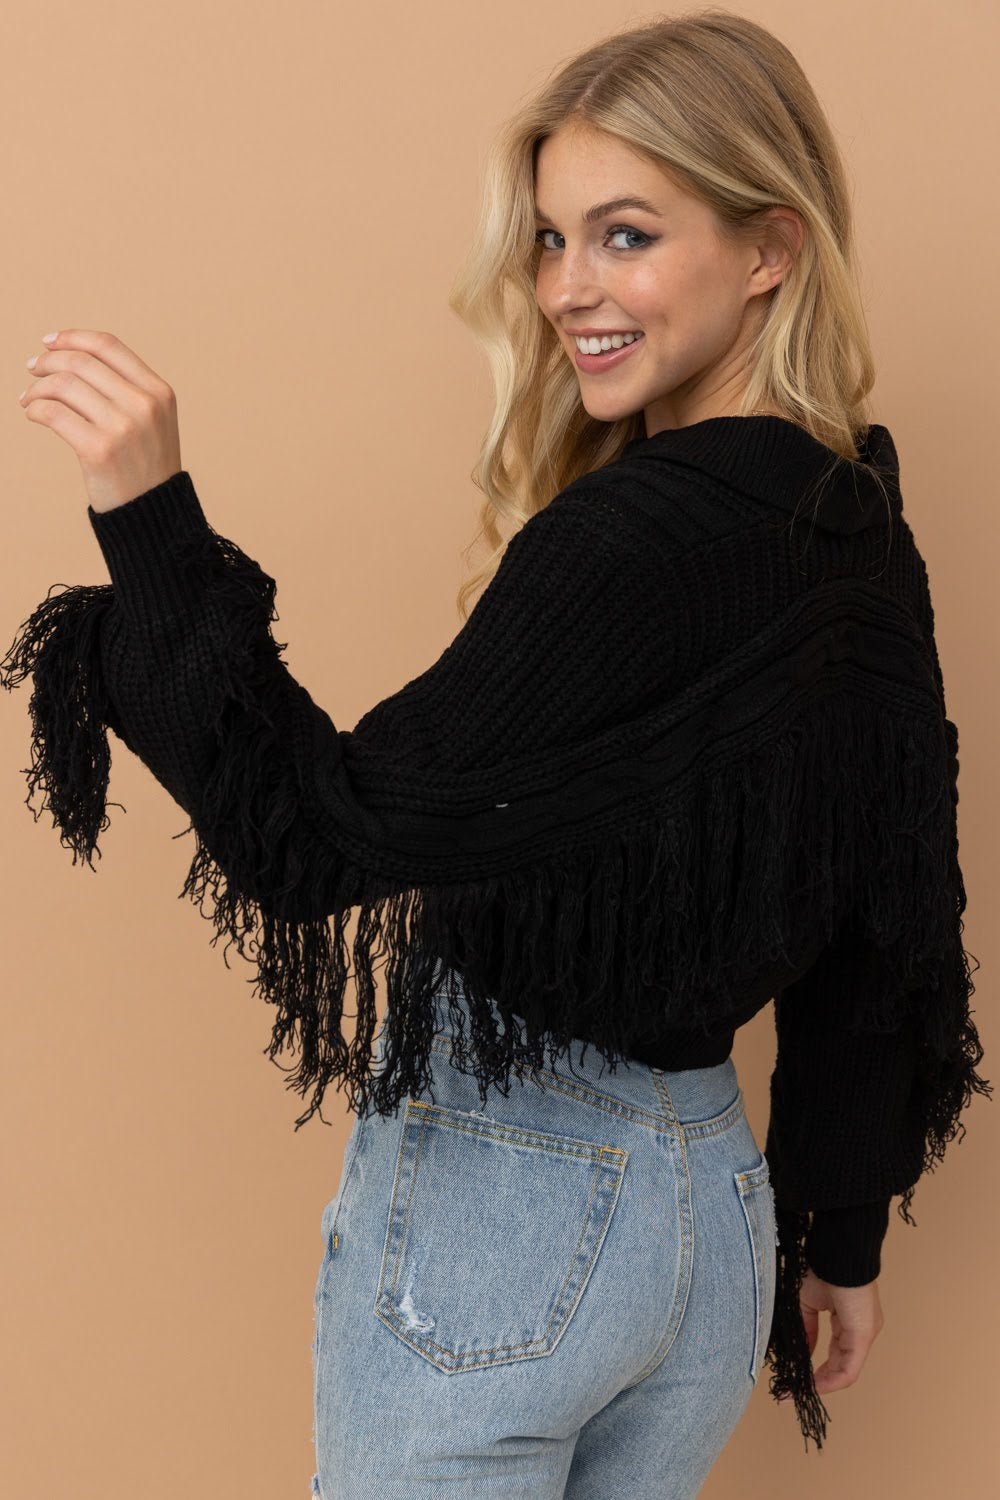 Elevate your wardrobe with the Crop Collared Fringe Sleeve Western Sweater by Blue B. Featuring a chic urban western, boho-cowgirl style, this sweater is perfect for adding a touch of boho-chic to any outfit. With its fringe detail, it adds a trendy and stylish element. Upgrade your look with this must-have sweater.